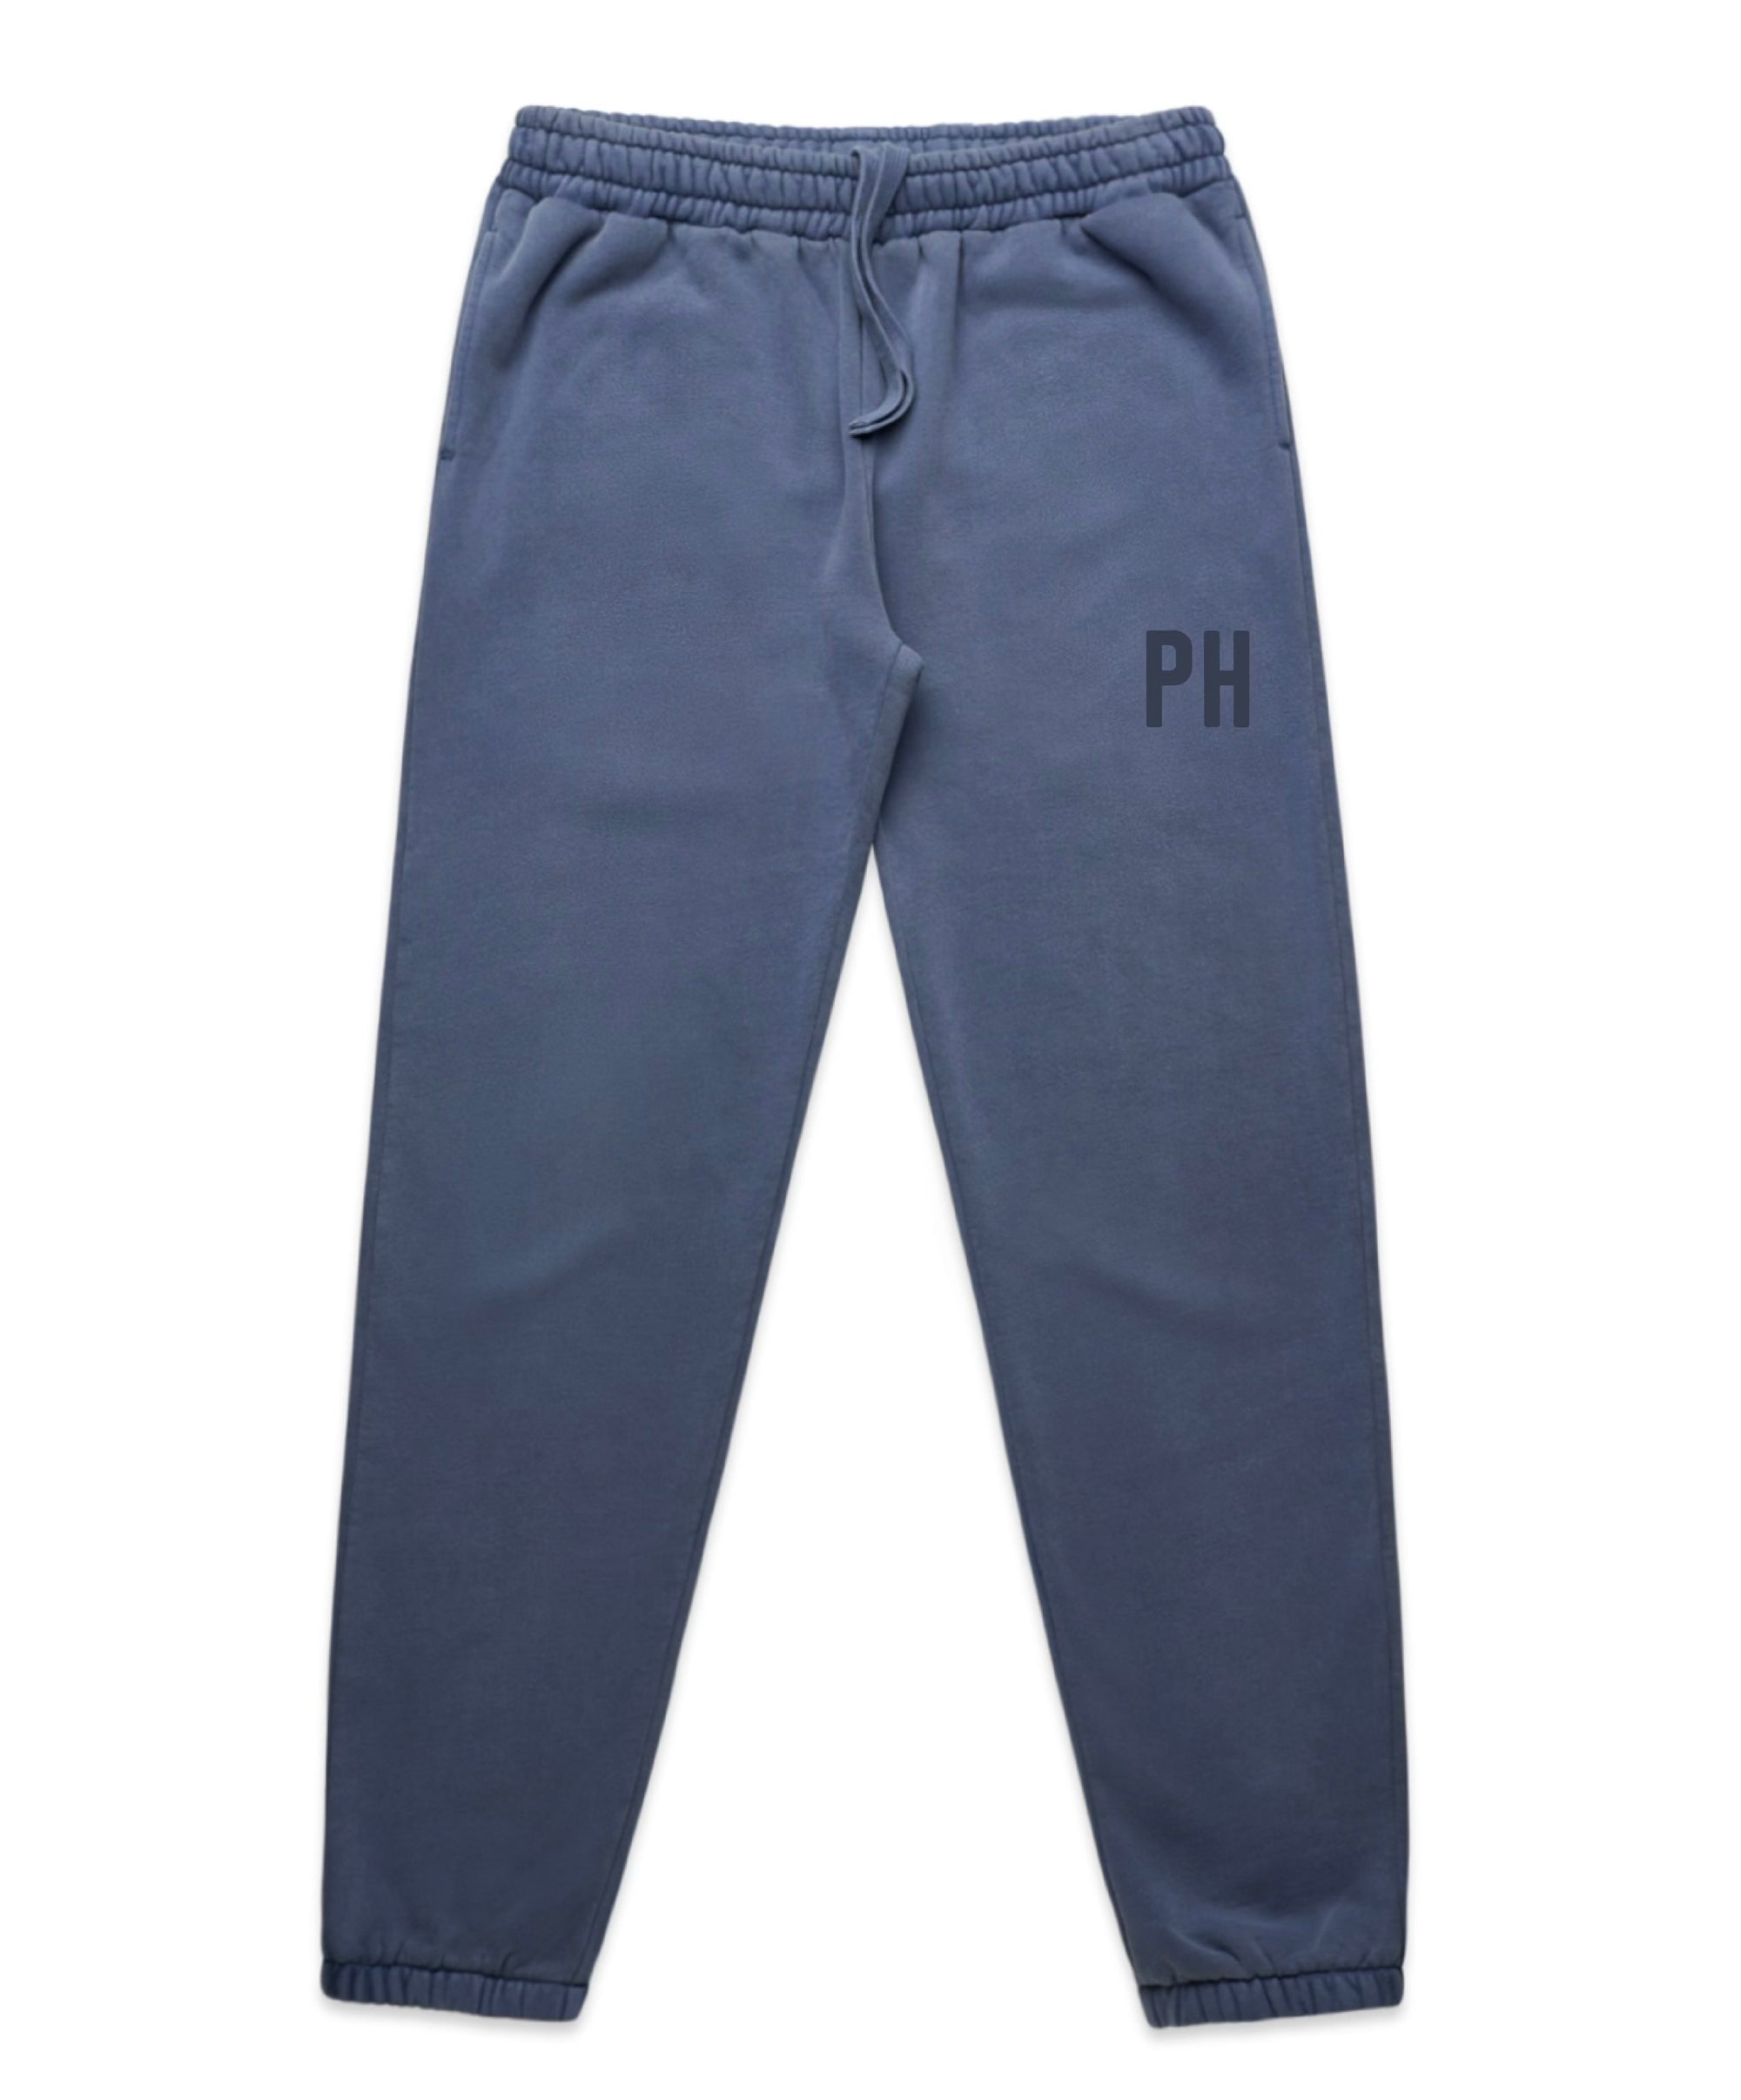 PH 3D Puff Embroidery - Blue Faded Joggers